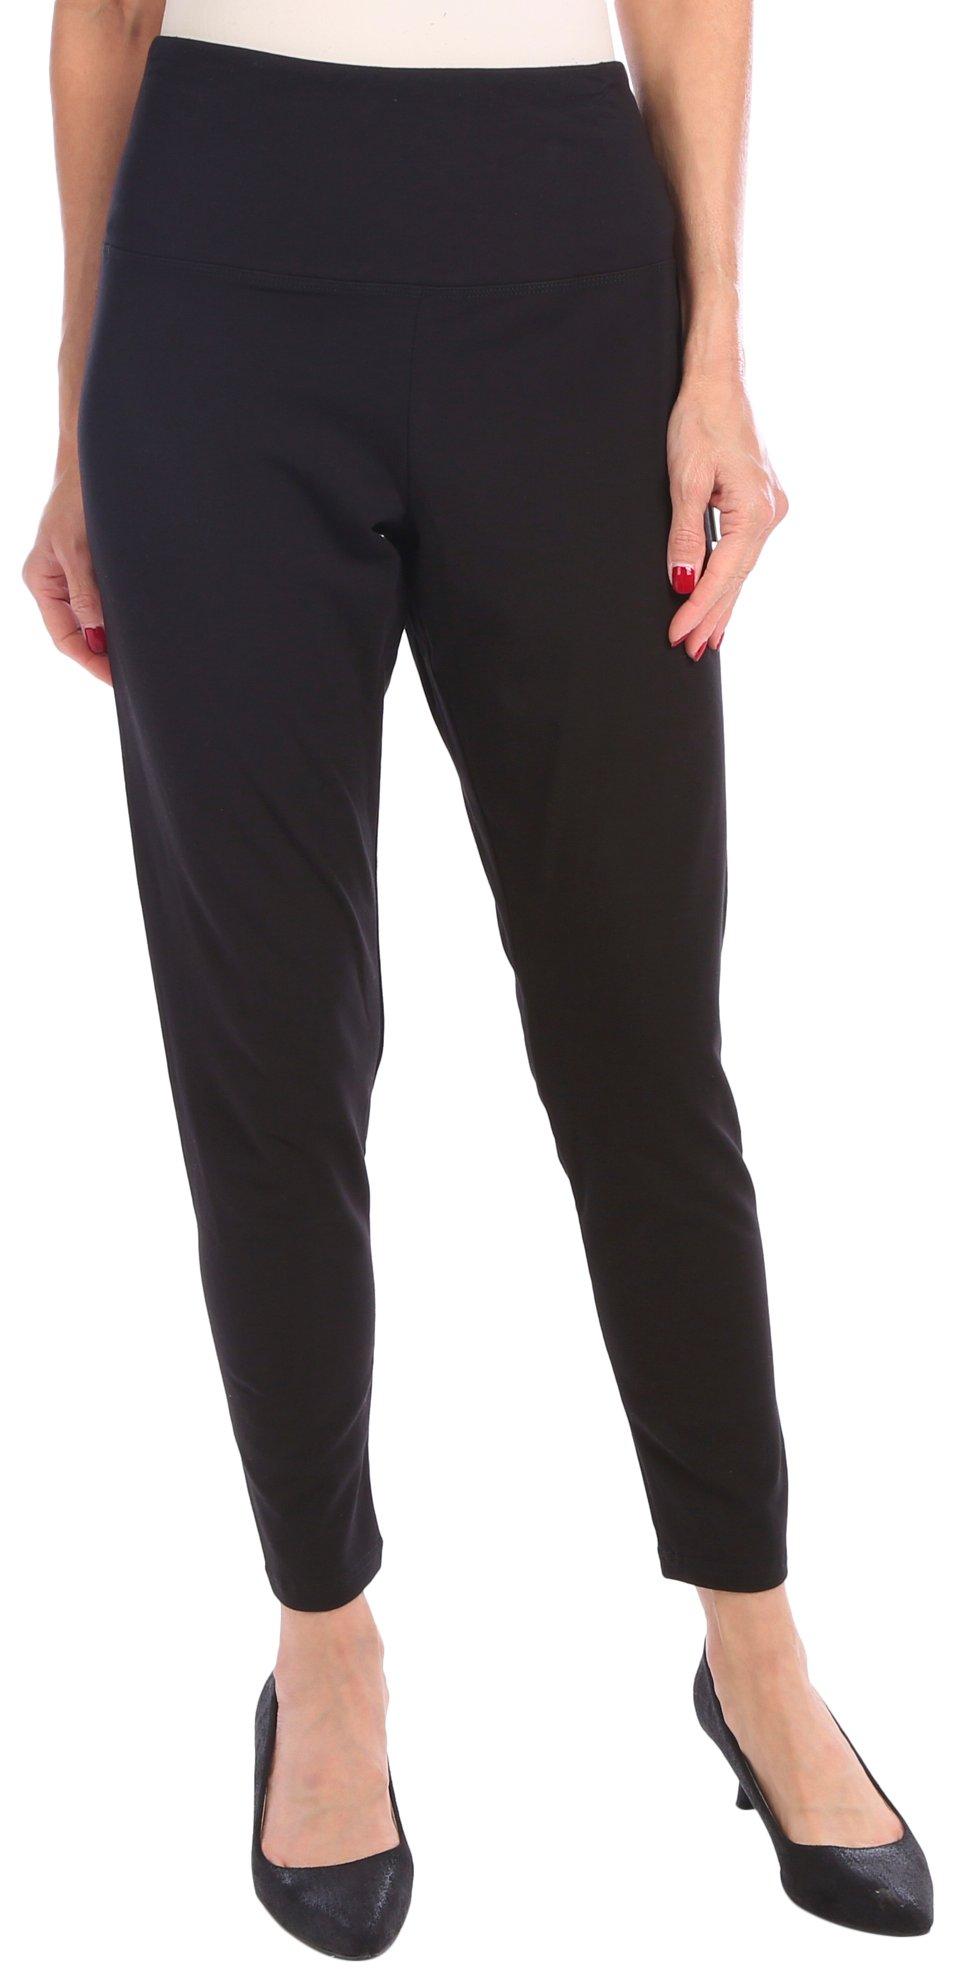 Suave black and white tummy control leggings size SP - $23 - From Cynthia